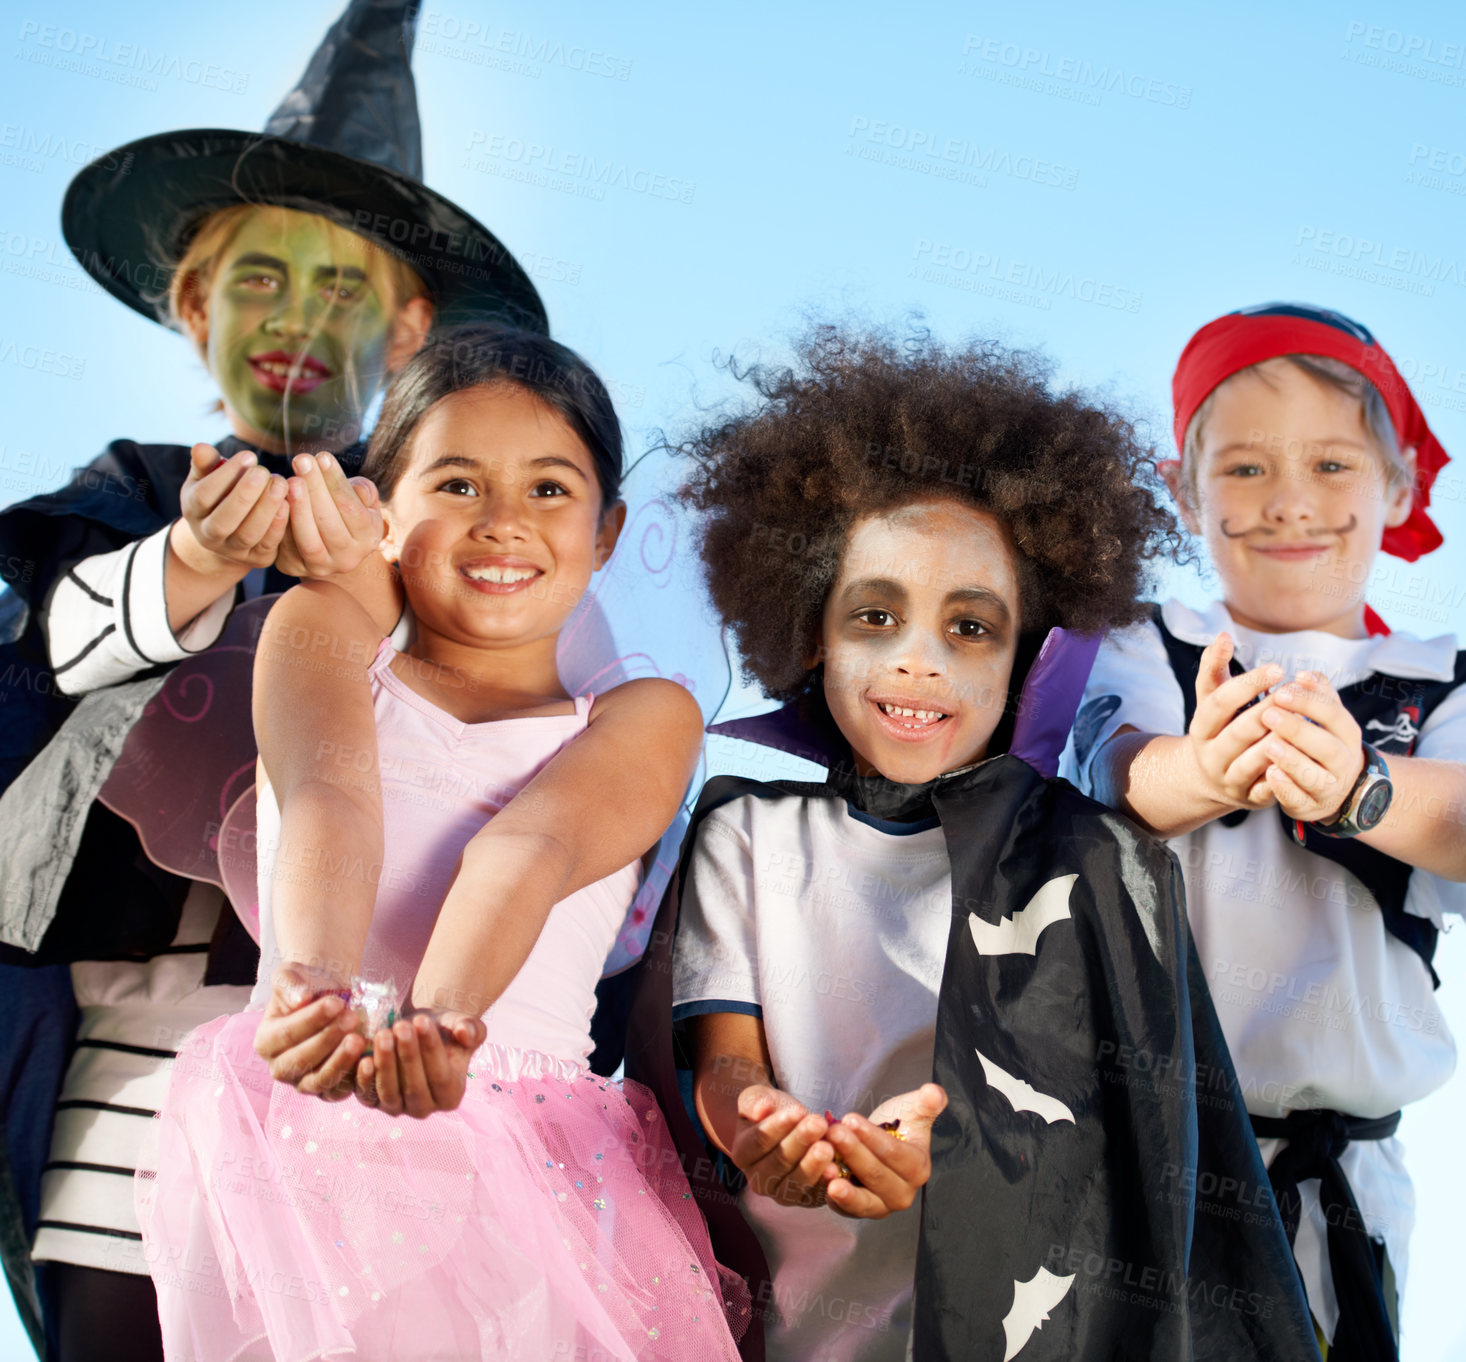 Buy stock photo Children, group and portrait for halloween costume for sweet candy asking, trick or treat for fantasy. Friends, hands or dress up as witch or pirate for holiday fun or kid development, smile for play